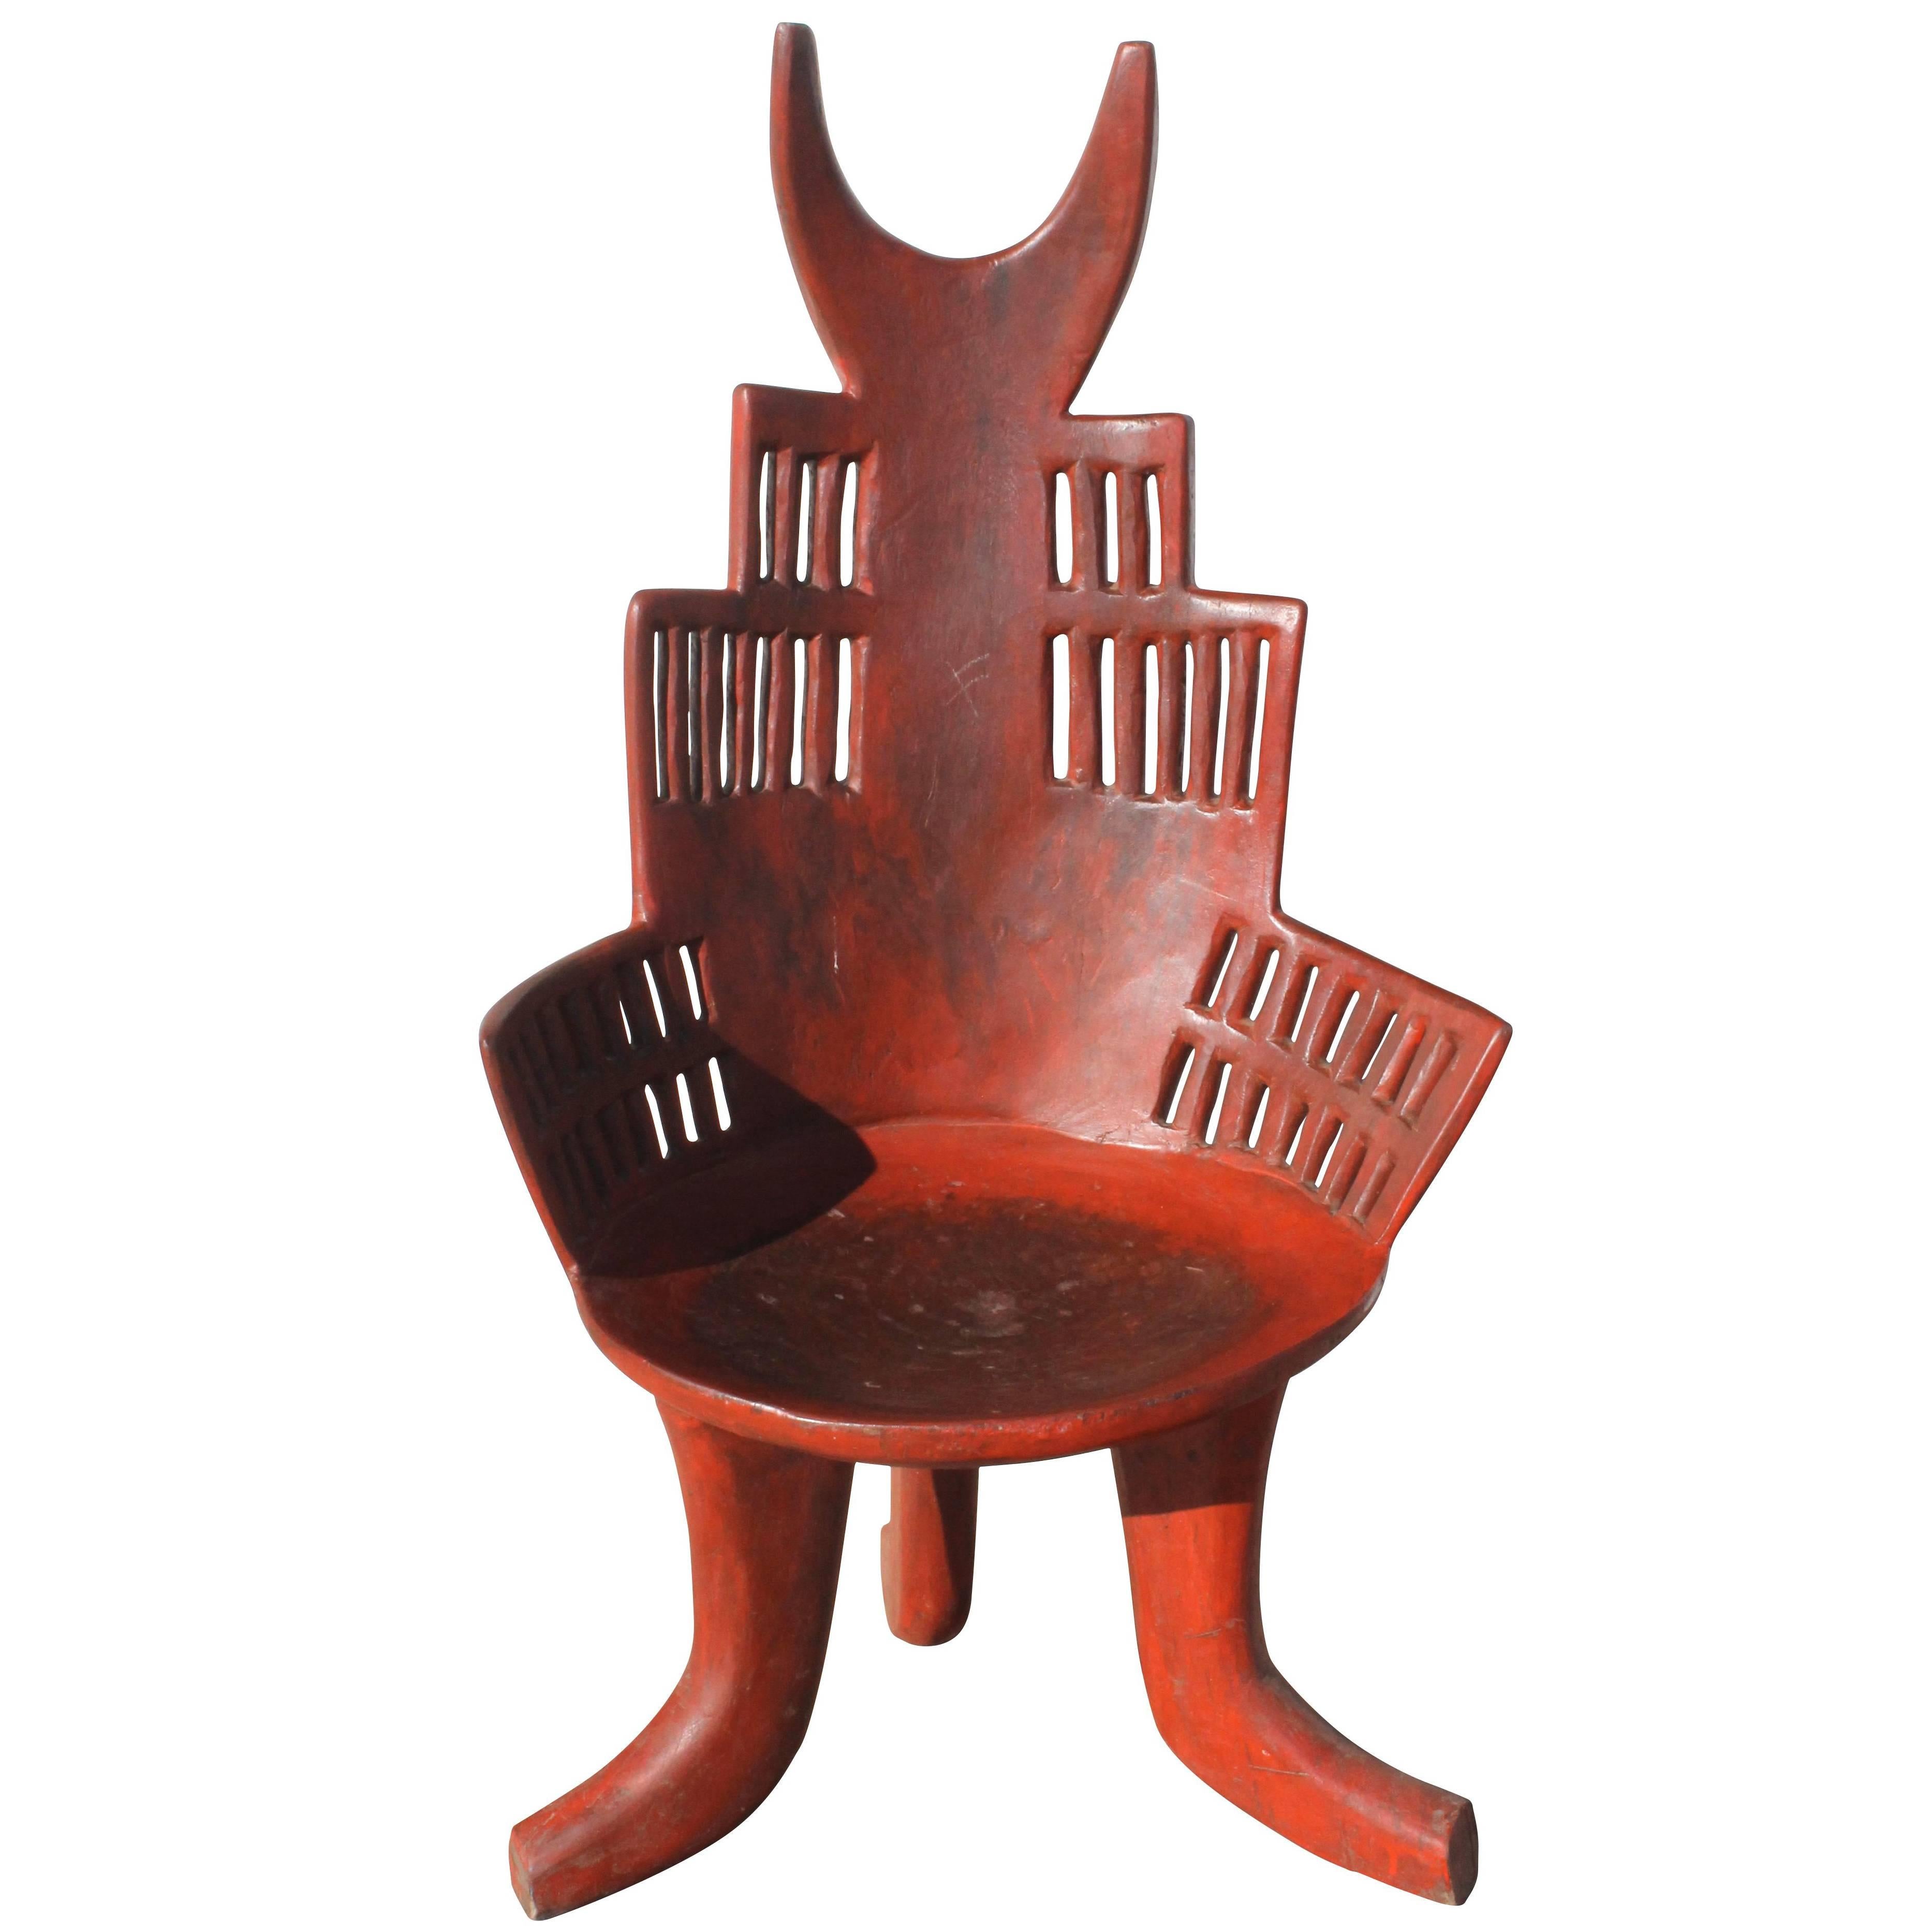 Weathered Red Carved Wood Chair, Ethiopia, 19th Century